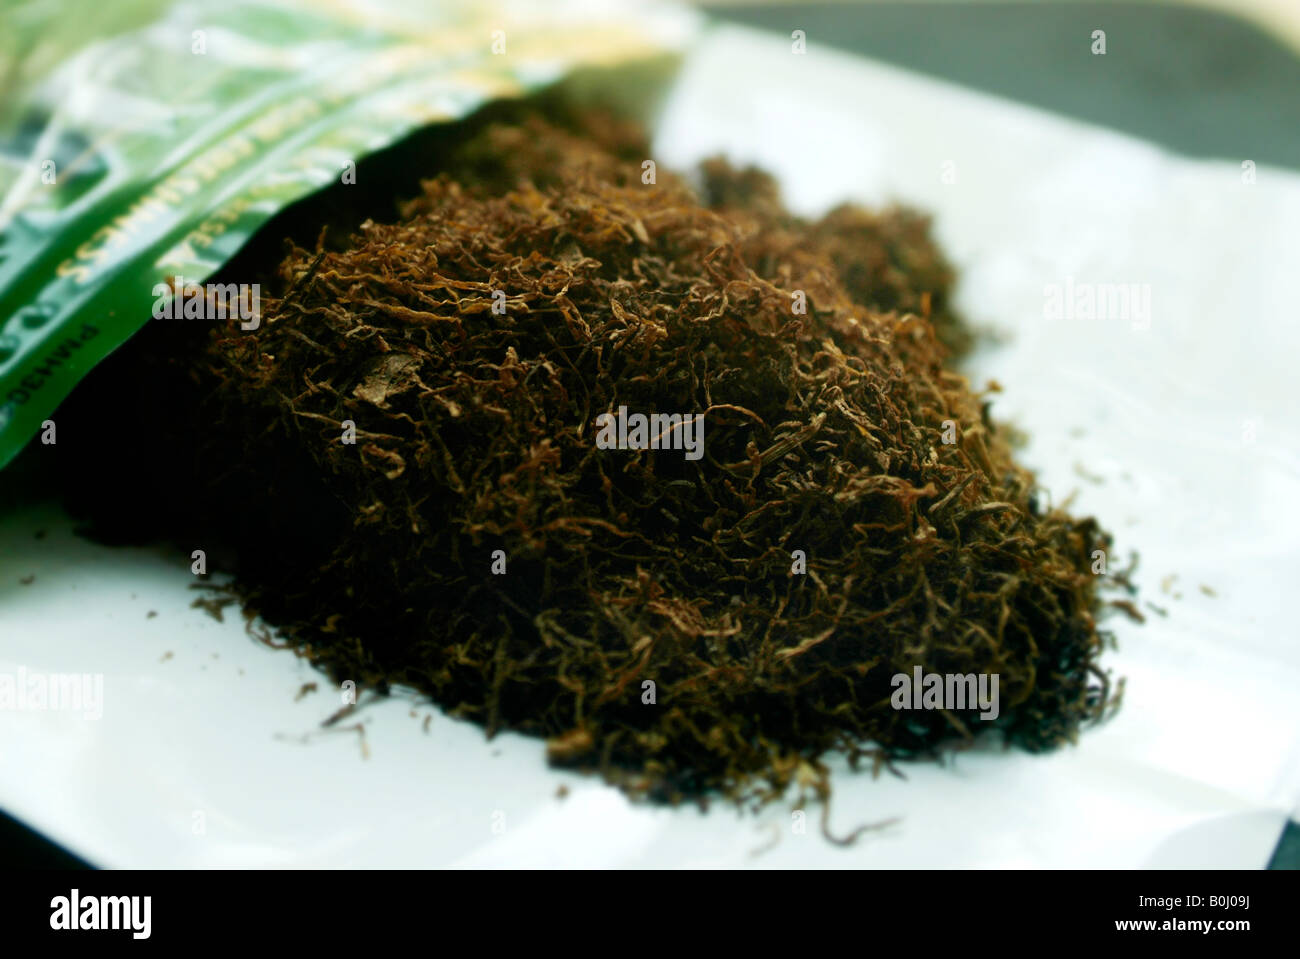 loose leaf tobacco for smoking in cigarettes Stock Photo